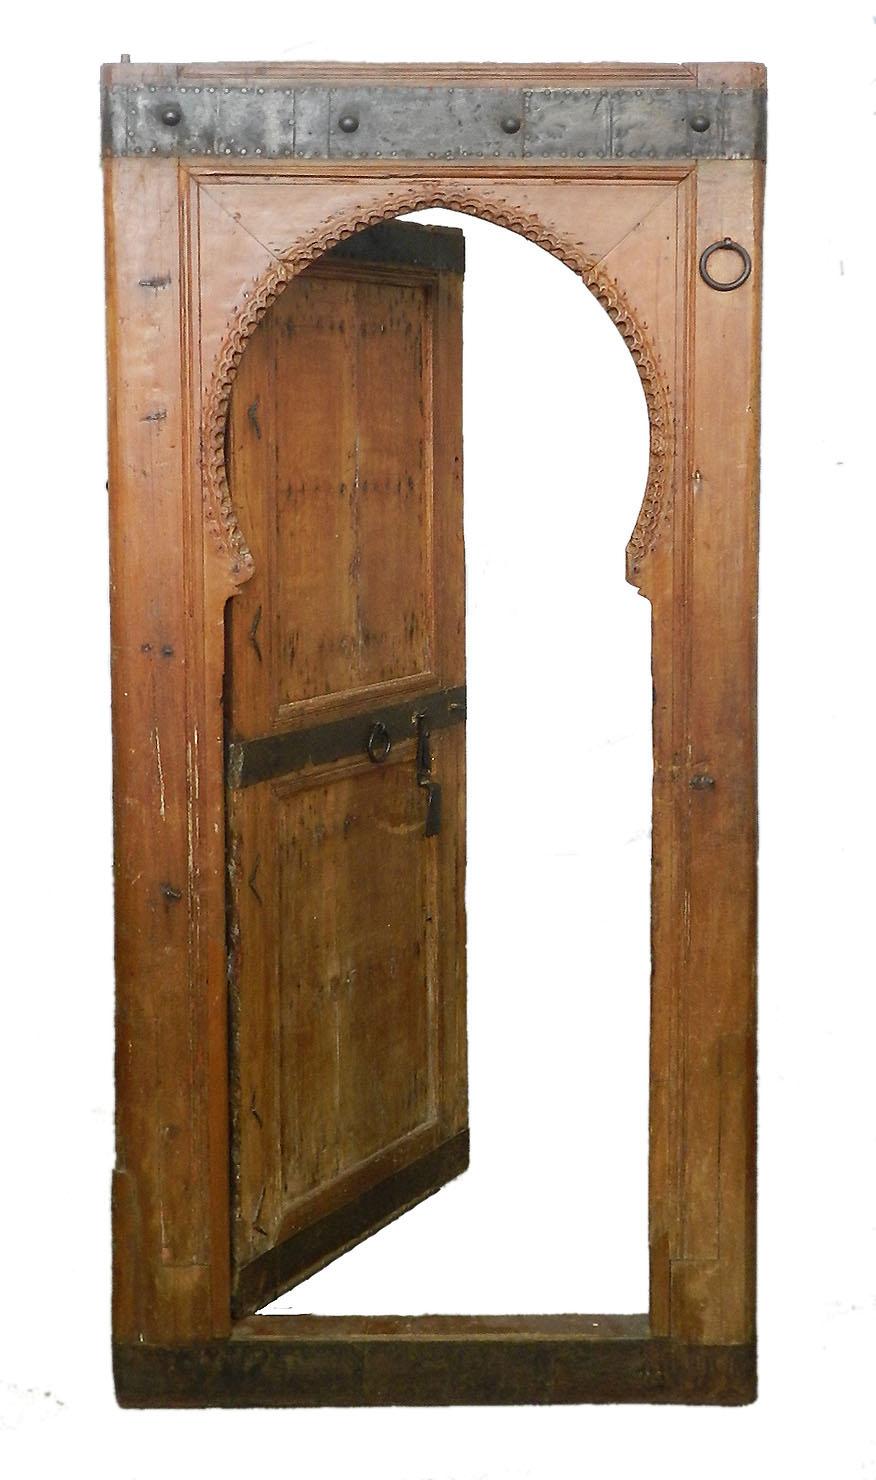 Two antique Moroccan arched doors 19th century Moorish
Hand carved wood
Hand forged iron door furniture
Decorative and stunning interior design pieces
Perfect for incorporating in design and building projects
In very good antique condition and both